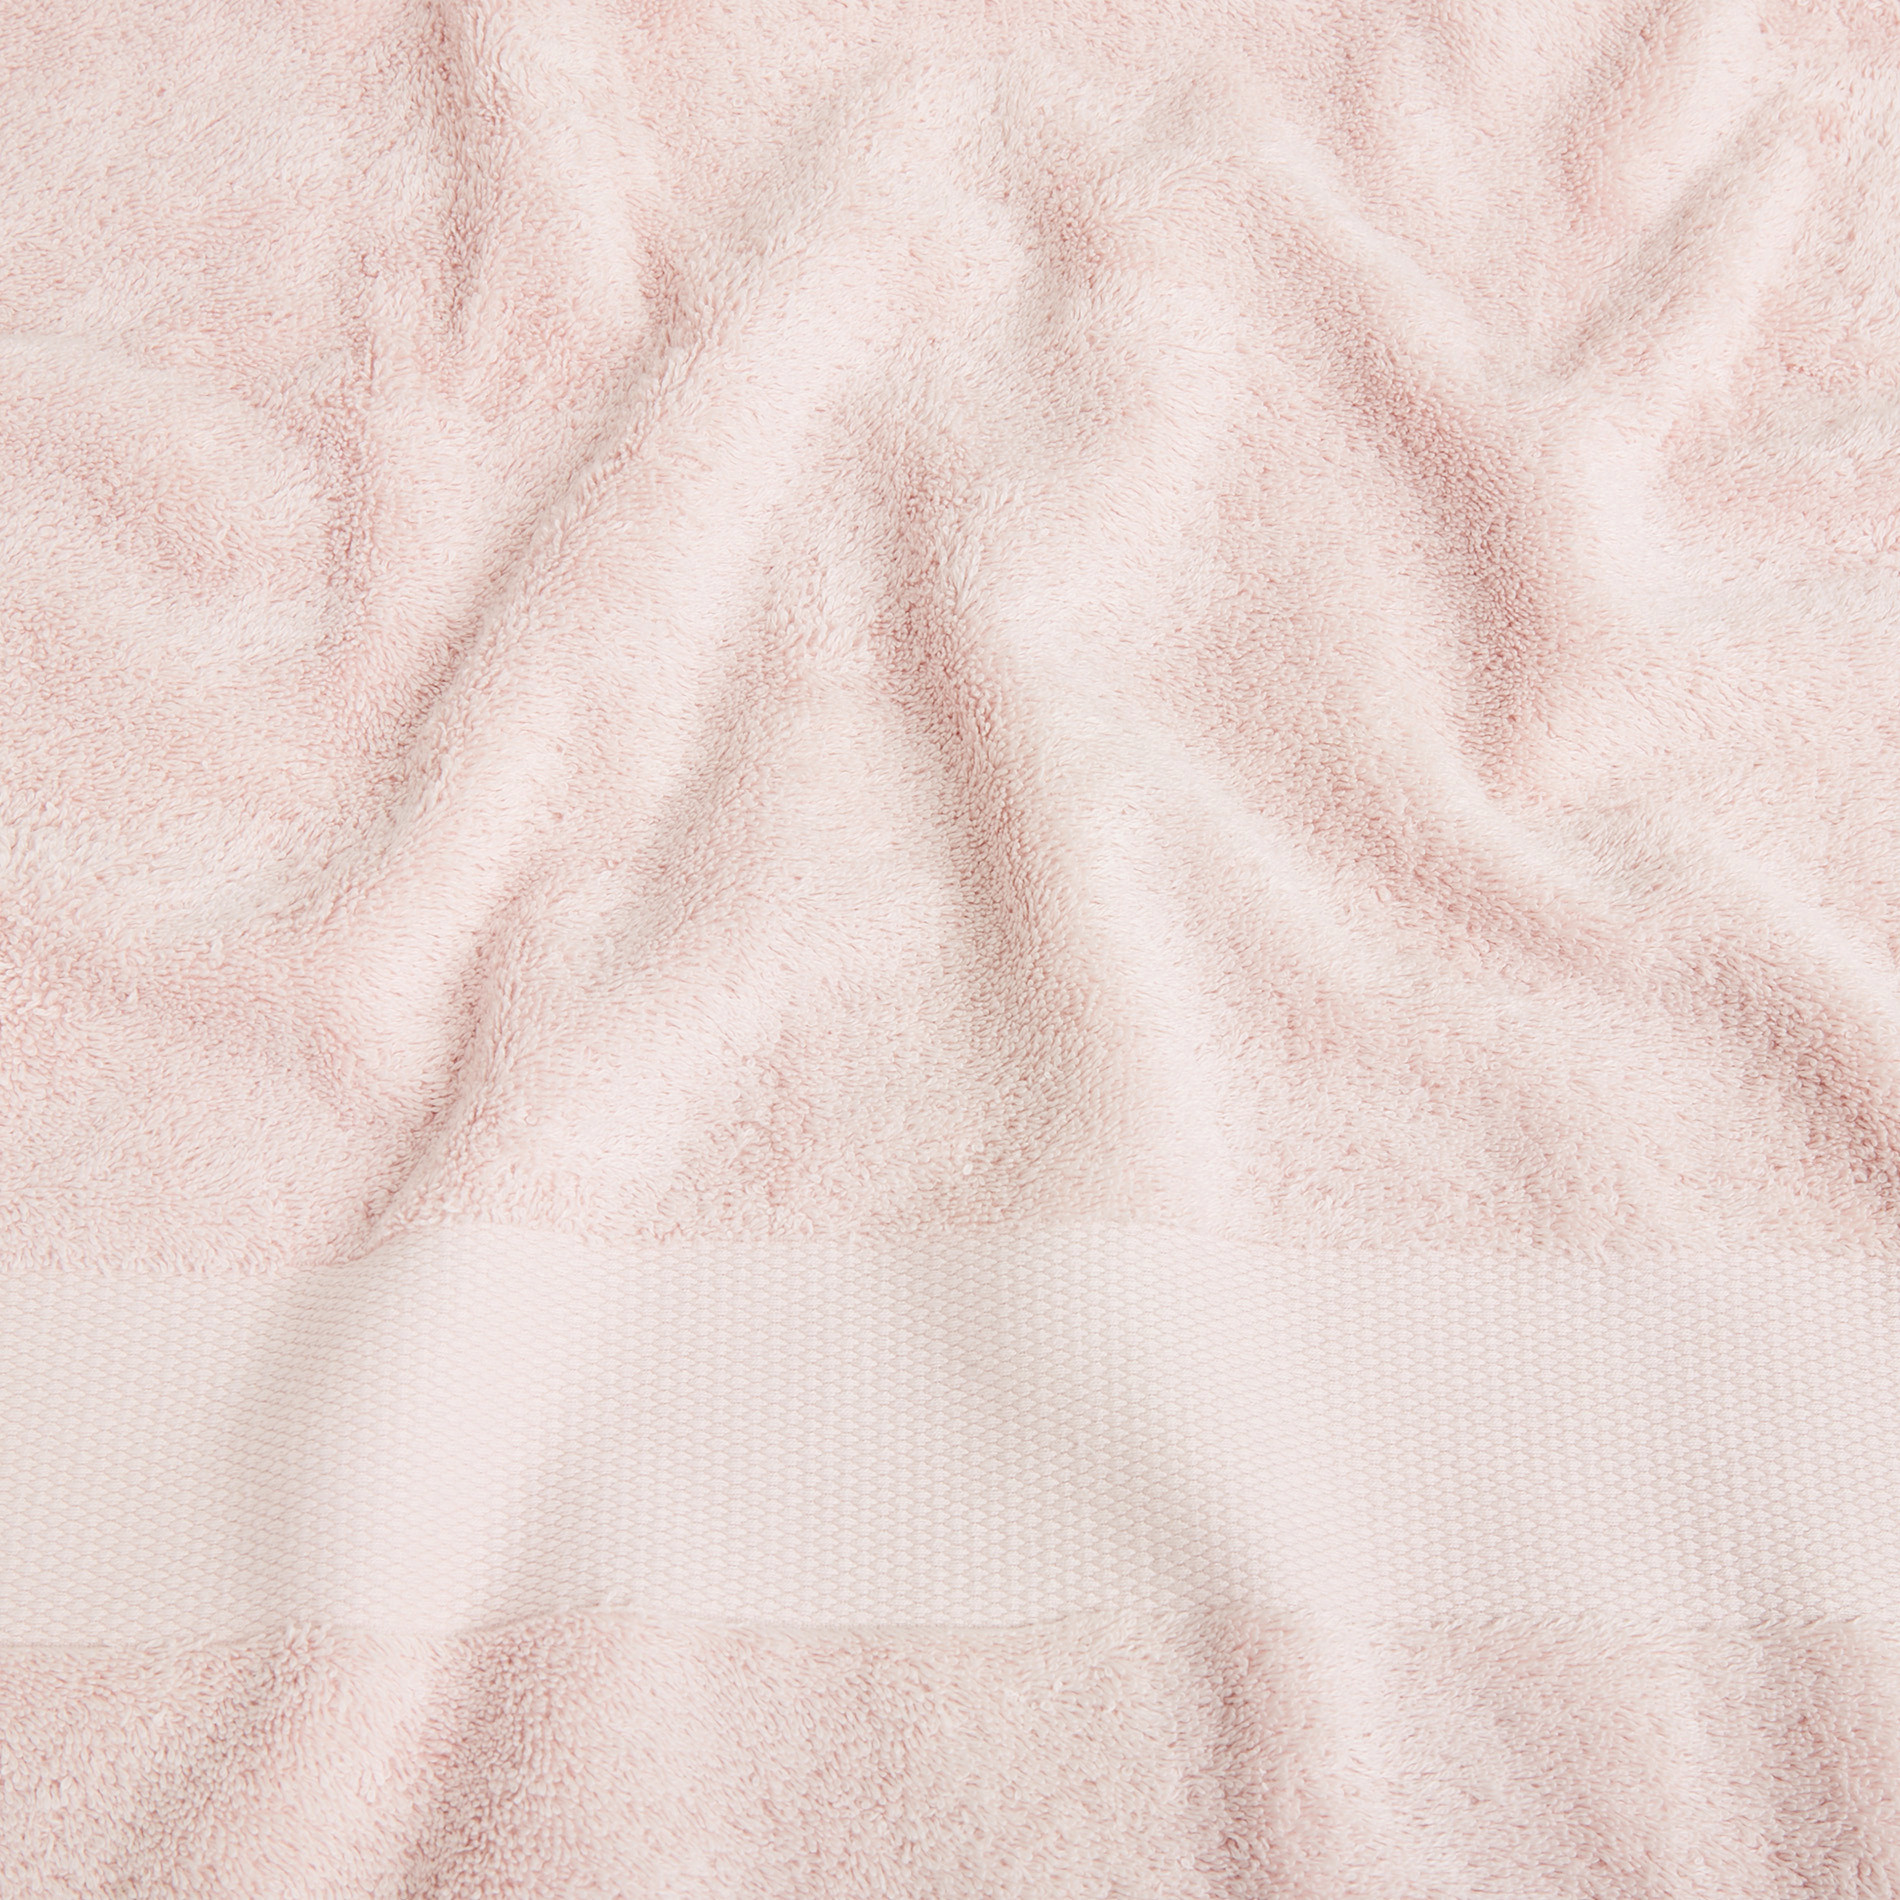 Zefiro pure cotton terry towel, Powder Pink, large image number 3